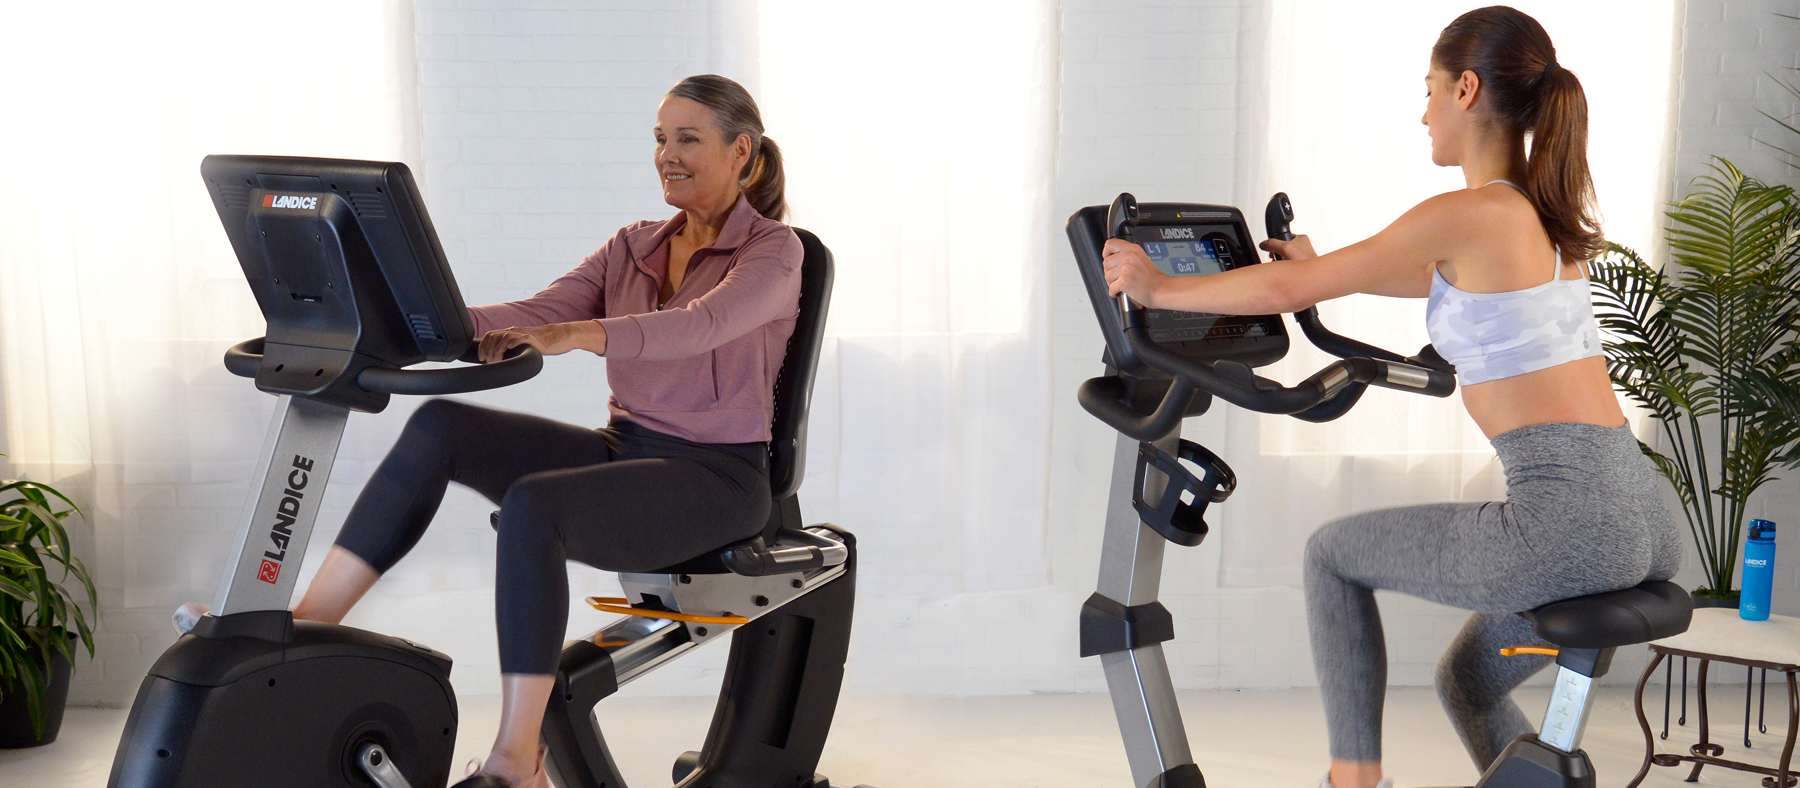 Upright Bike or Recumbent Bike? Which is the Right Bike for You?